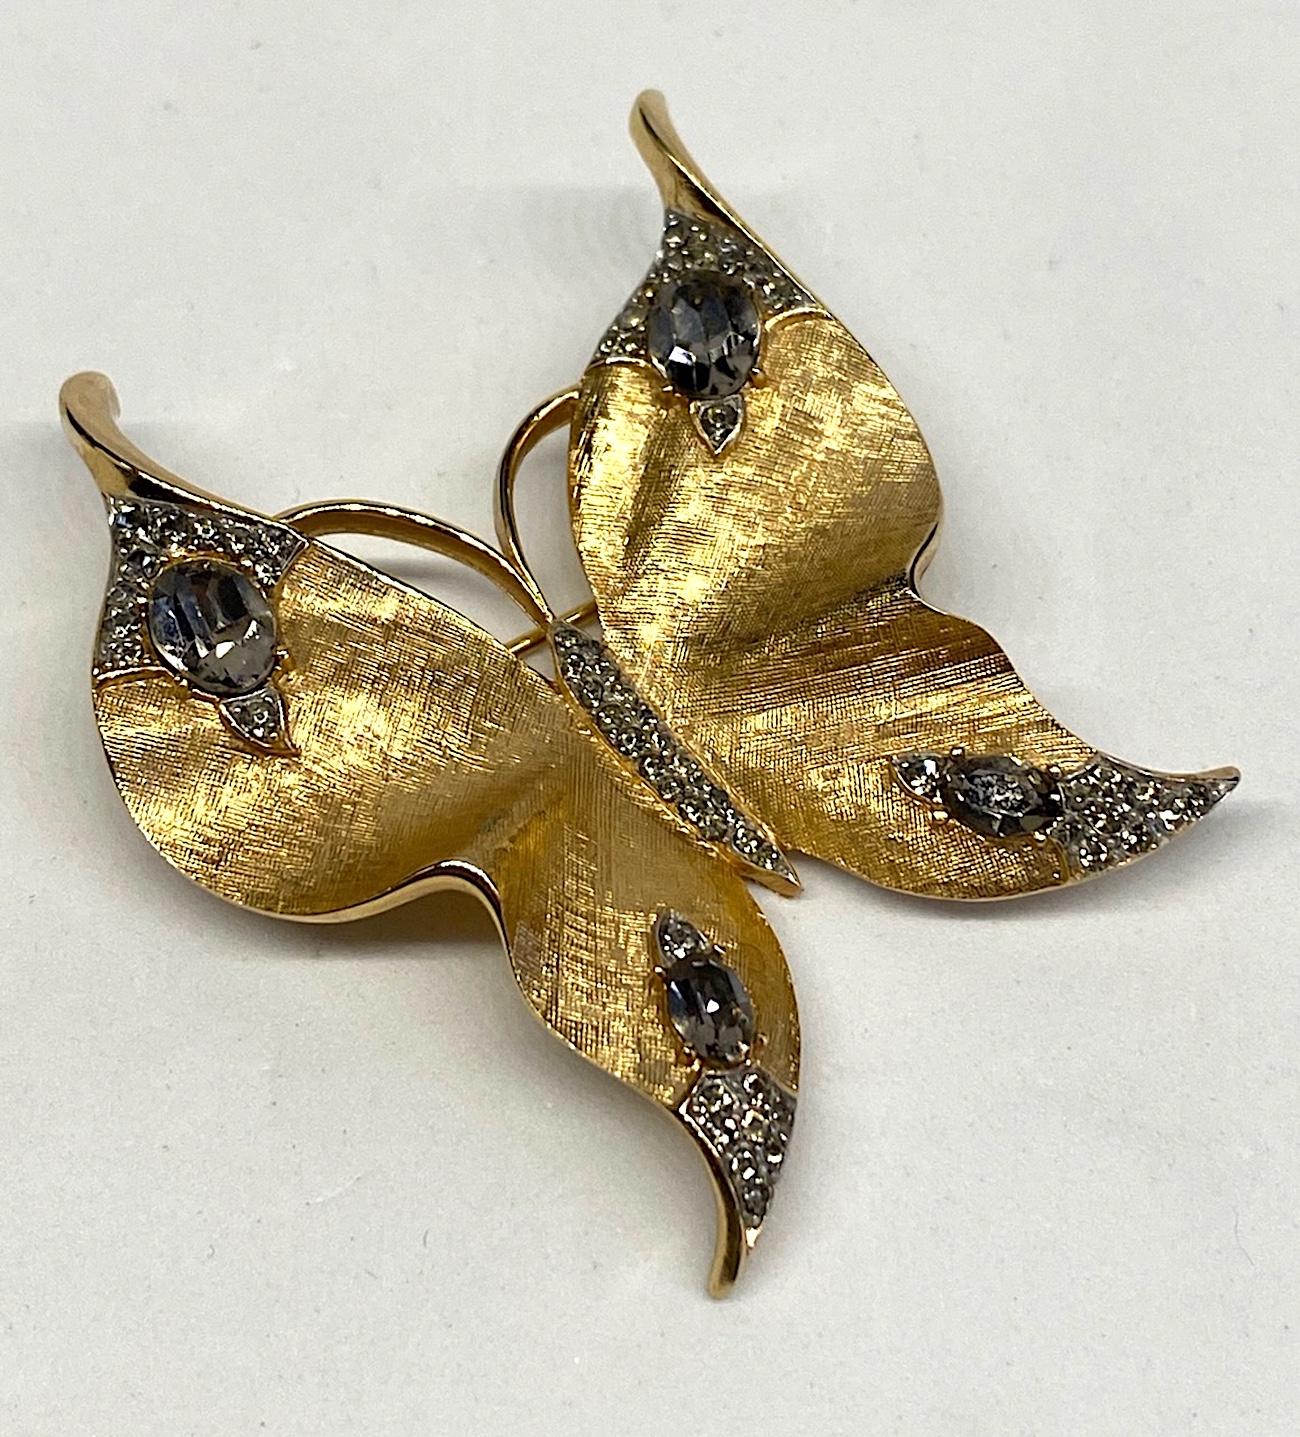 A lovely Trifari butterfly brooch from the 1950s. The wing are in a textured satin gold while the edges and tips are a shiny gold for contrast. A large oval grey rhinestone at the top of each wing and mirrored with a small oval grey rhinestone on